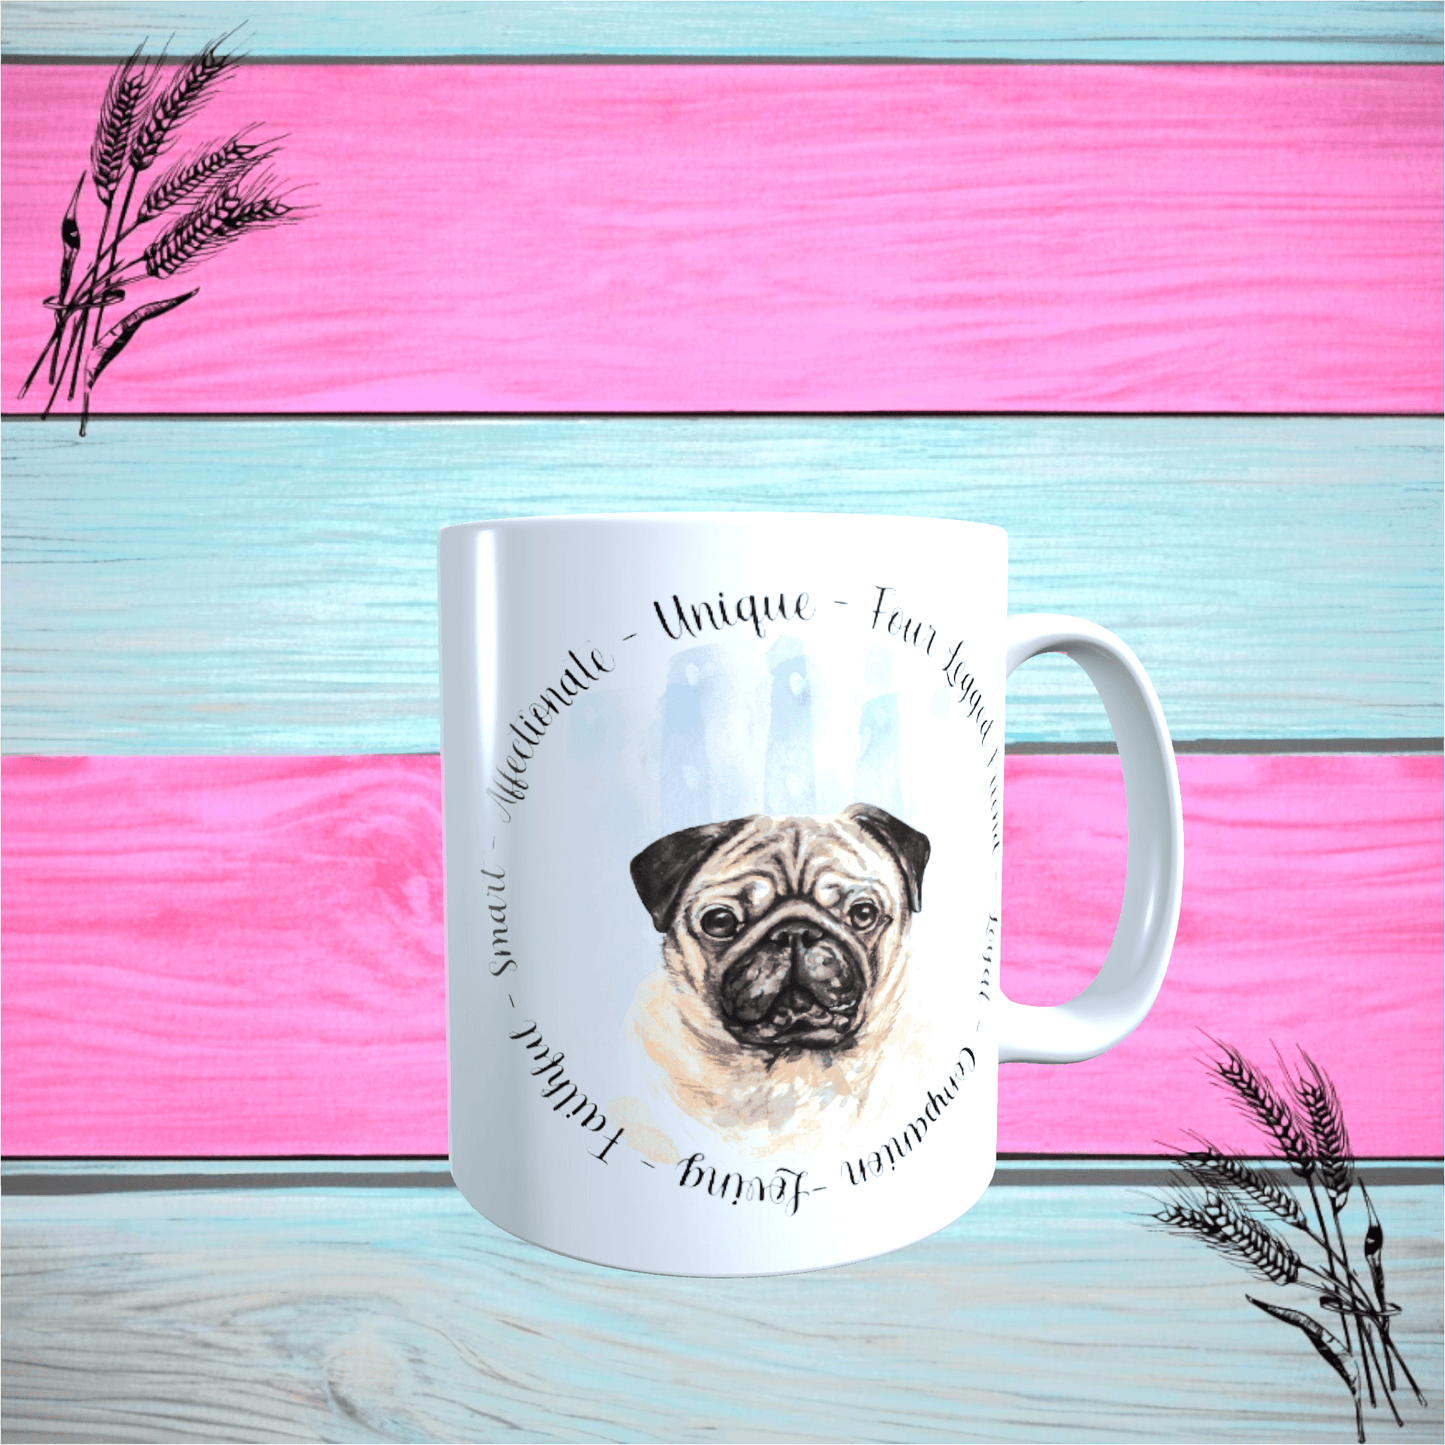 Quality Printed Unique Dog Picture Mugs All Breeds A-D